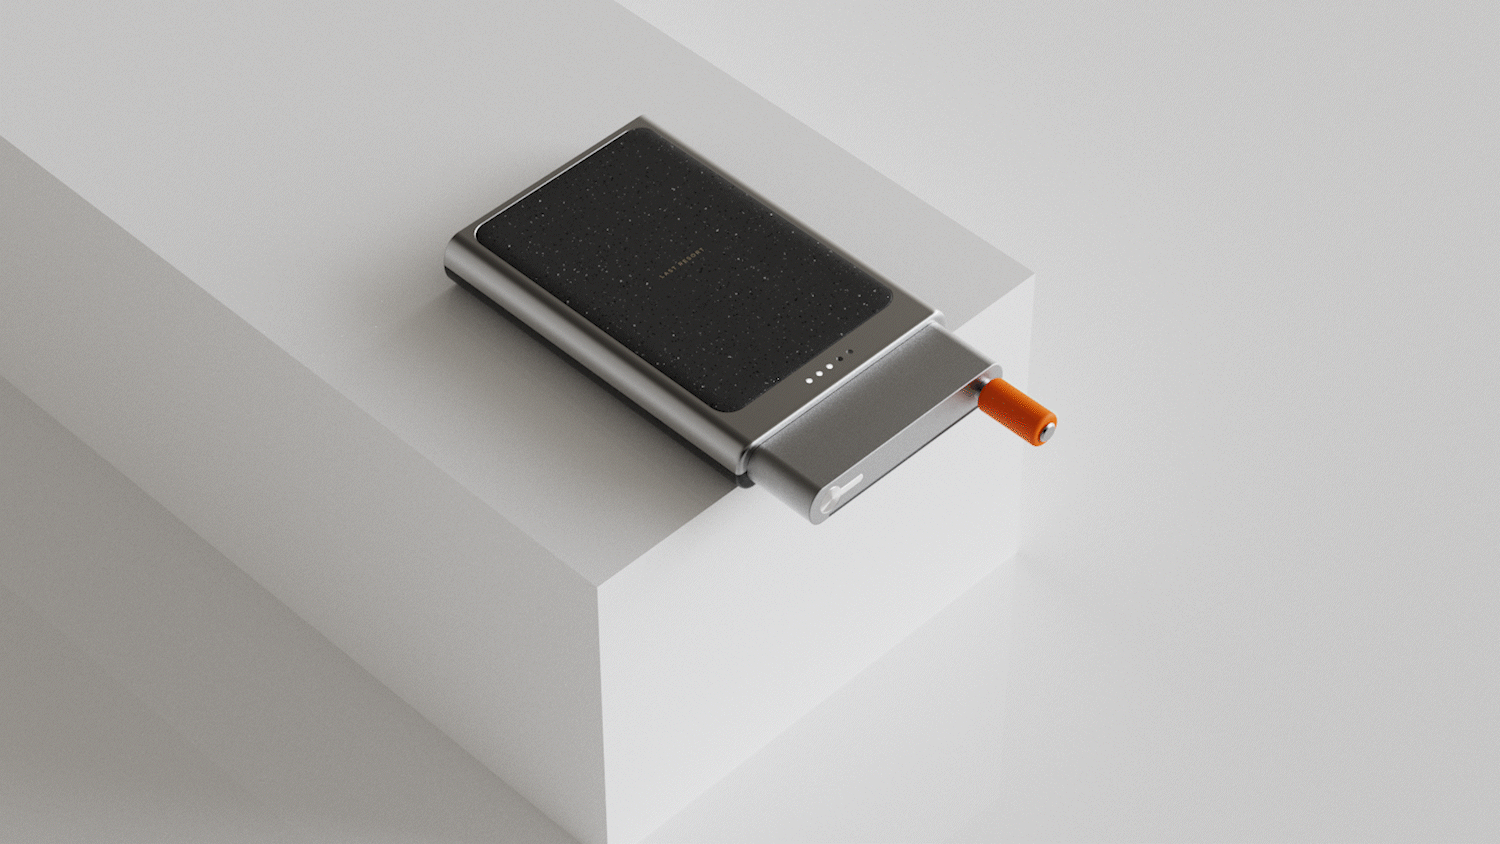 This aesthetically designed hand crank power bank will never let you down